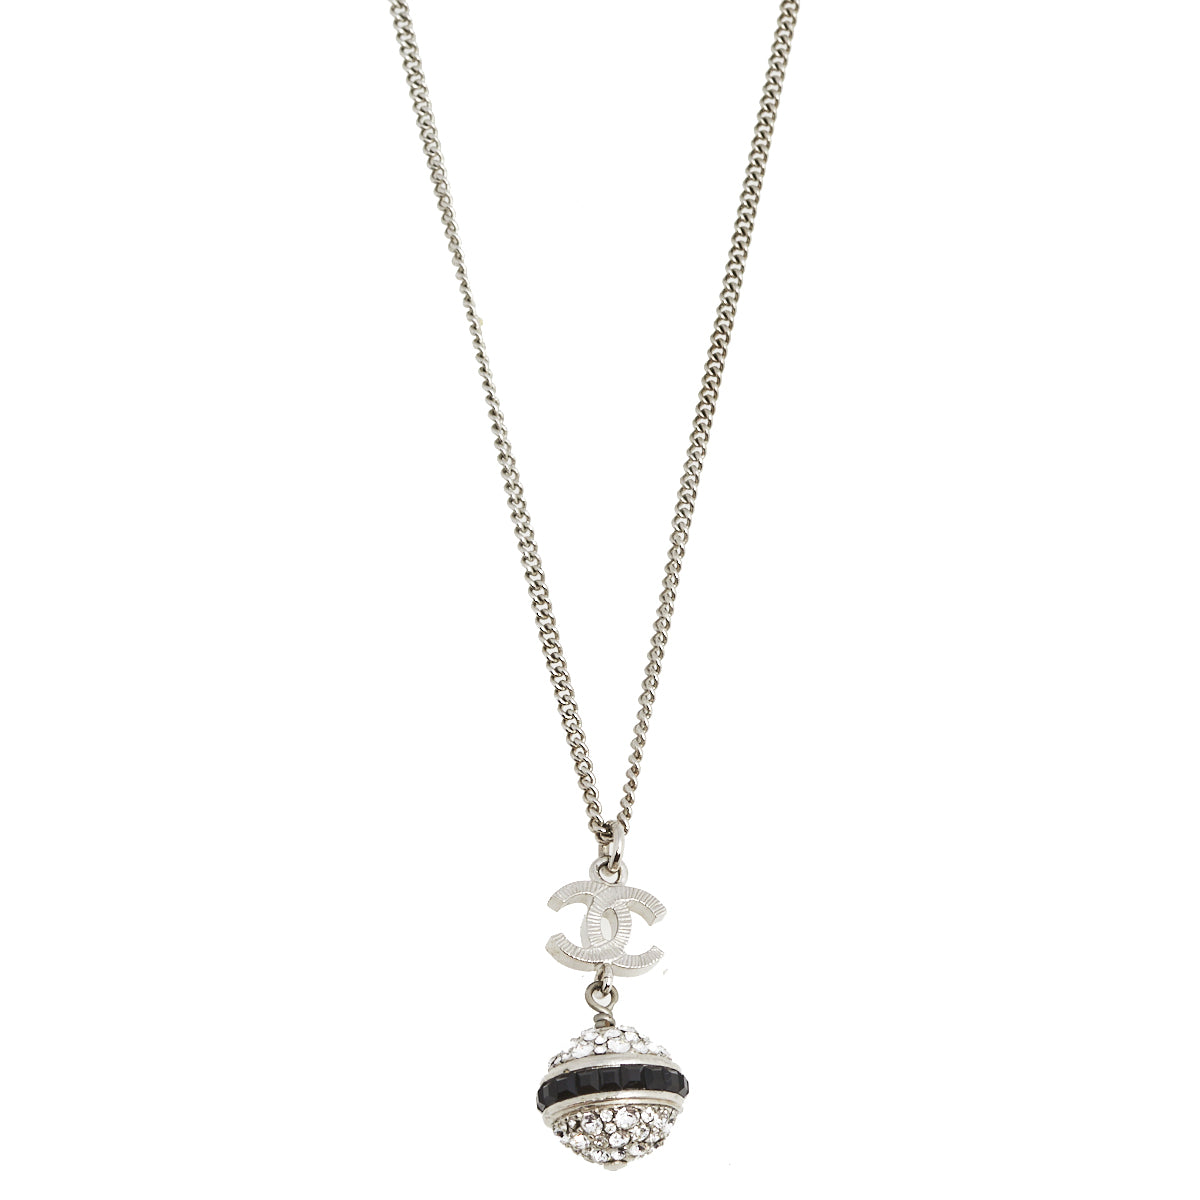 Chanel CC Silver Tone Metal Crystal Ball Pendant Necklace